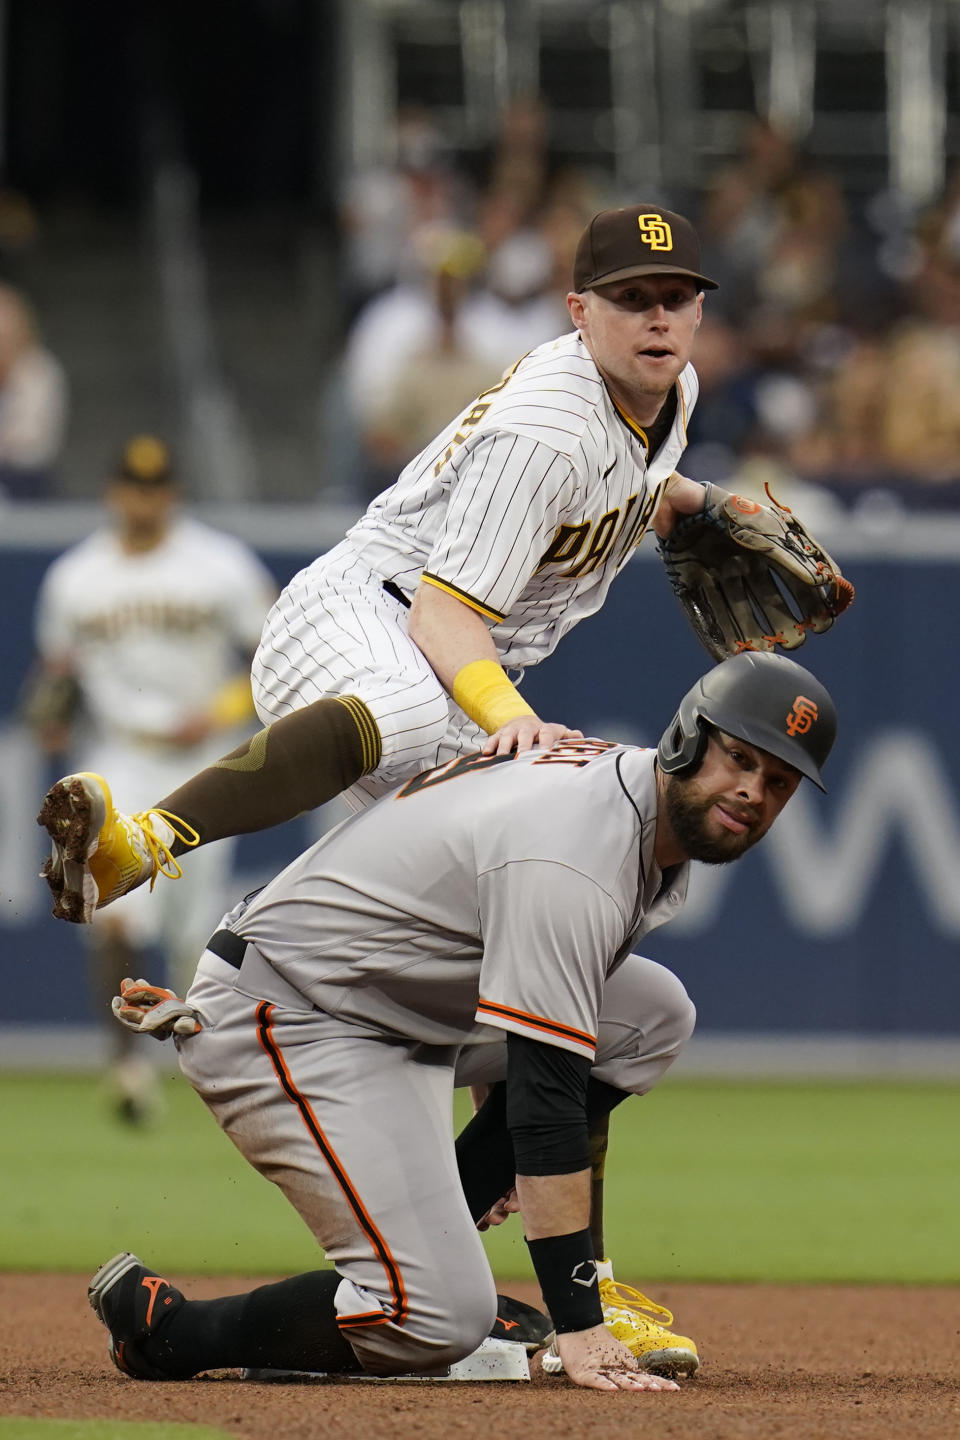 San Diego Padres second baseman Jake Cronenworth, top, watches his throw to first for a double play as San Francisco Giants' Brandon Belt looks on after sliding in late to second base during the fourth inning of a baseball game Saturday, May 1, 2021, in San Diego. Giants' Wilmer Flores was out at first on the play. (AP Photo/Gregory Bull)